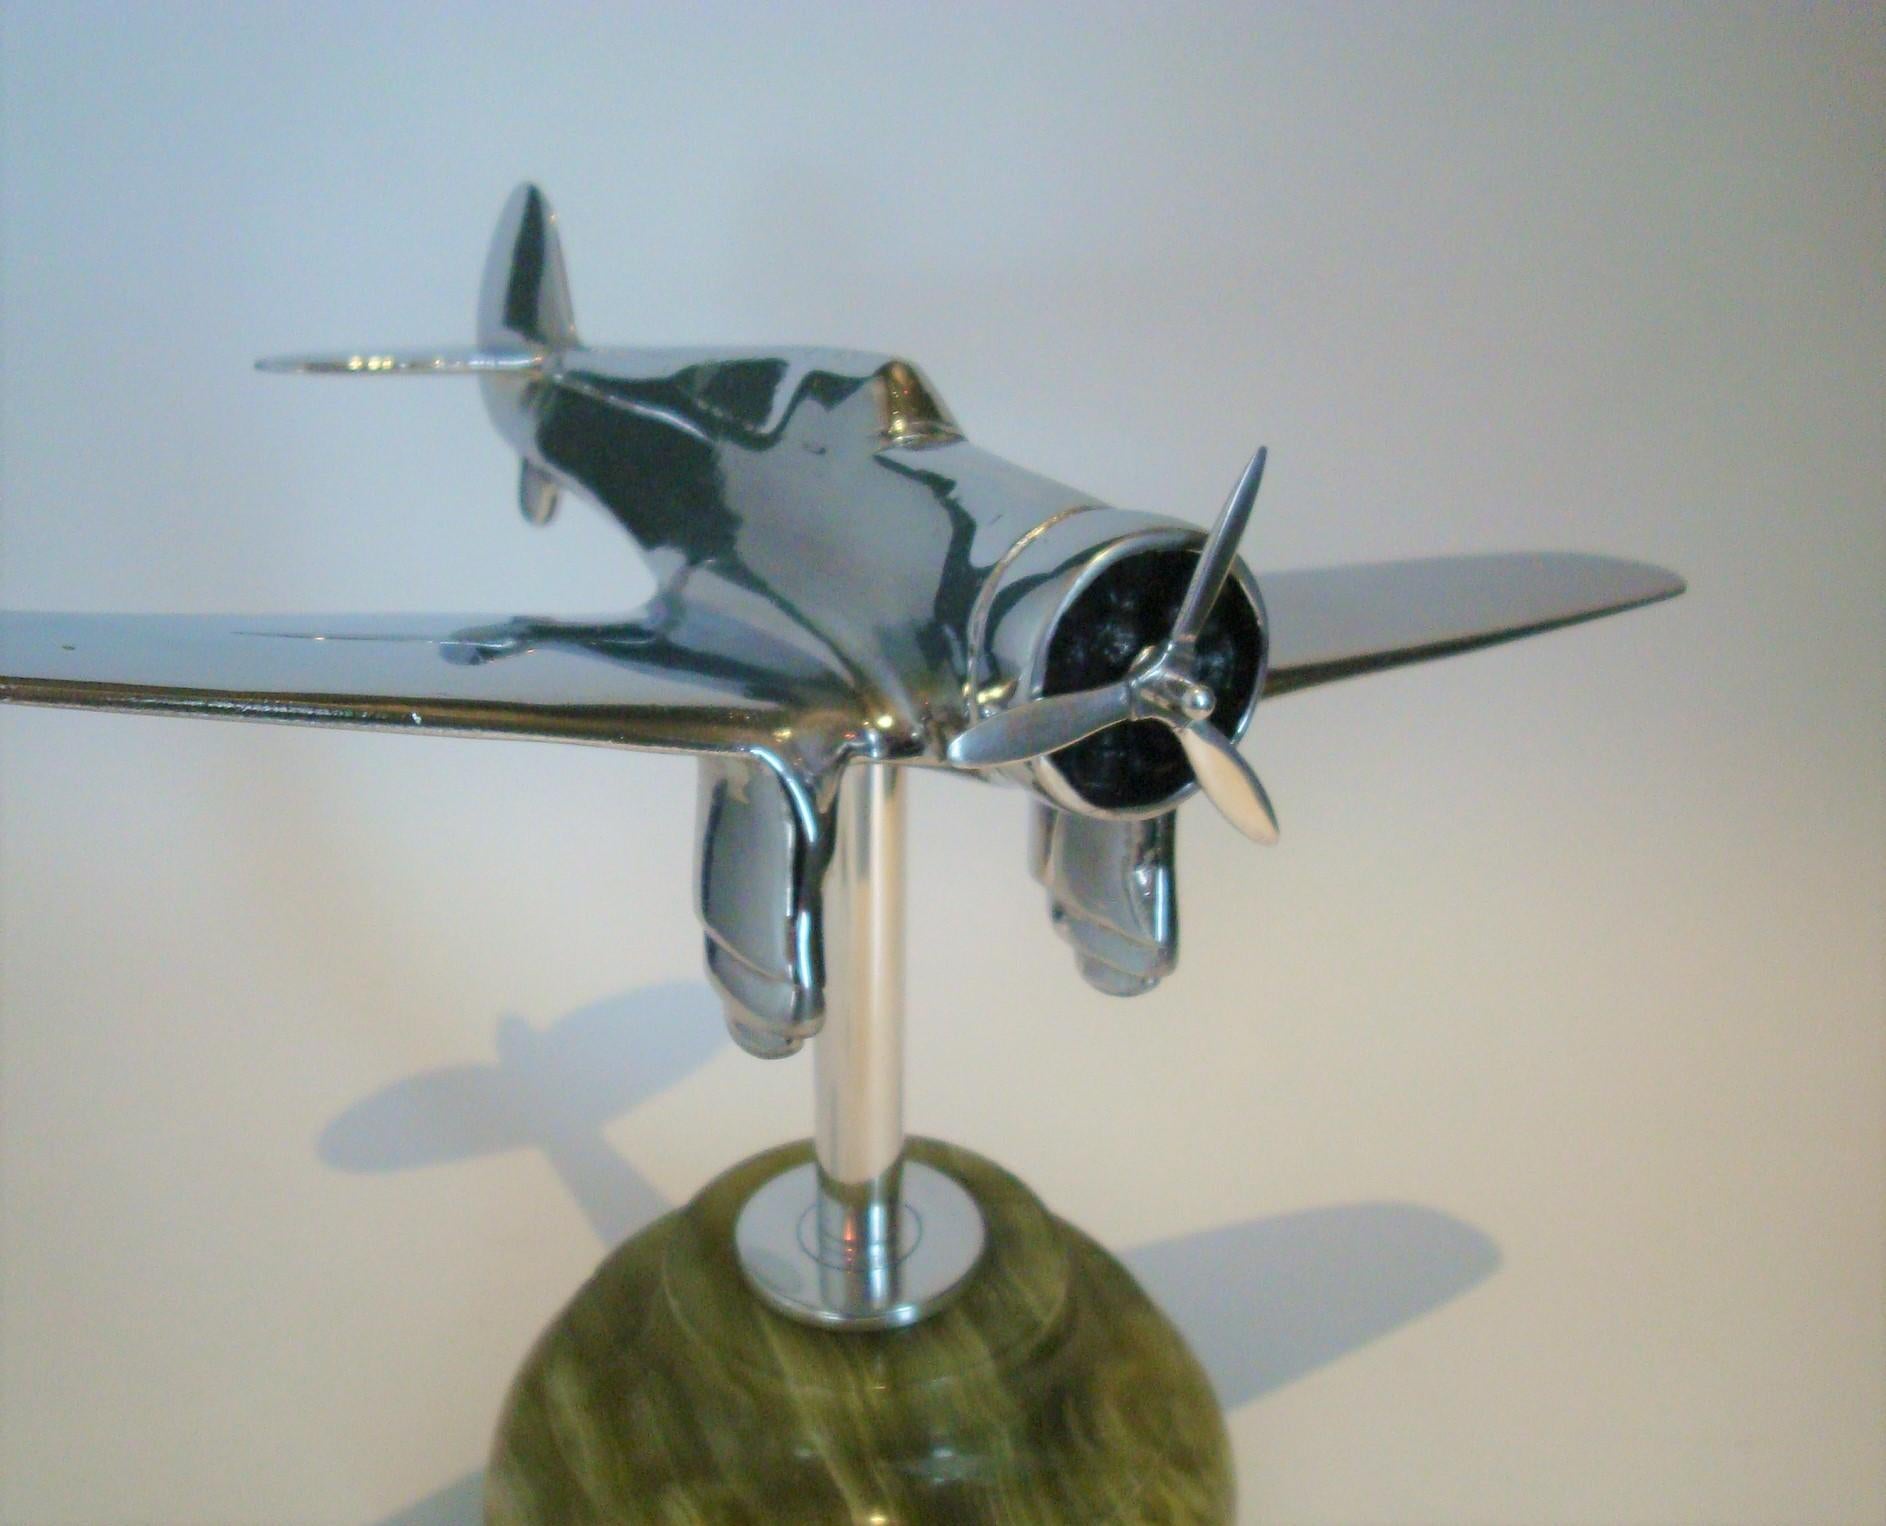 Mid-century desk model airplane - USA 1940´s
Single engine fighter. 
Cast aluminium perior aviation model, mounted over a marble base.
Excellent conditions.